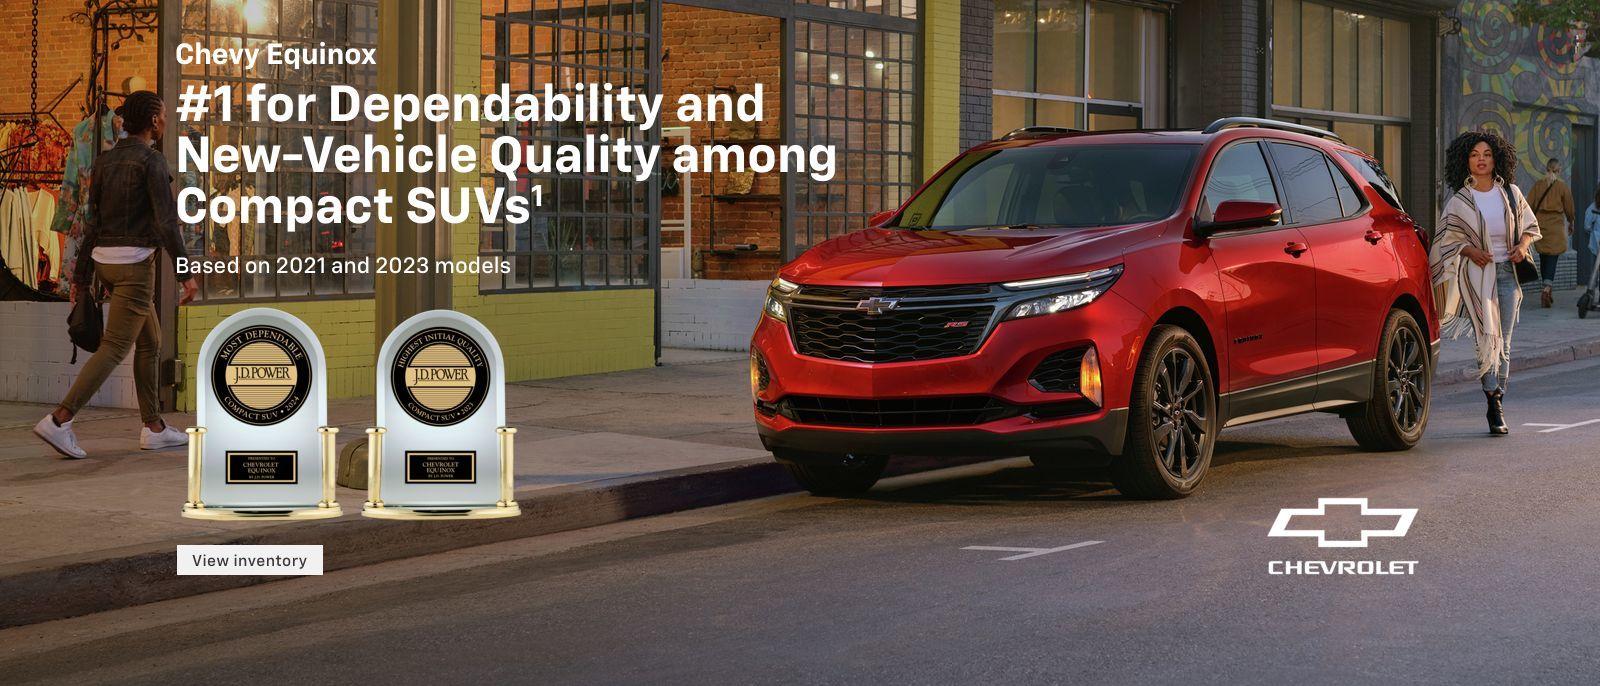 #1 for Dependability and New-Vehicle Quality among Compact SUVs